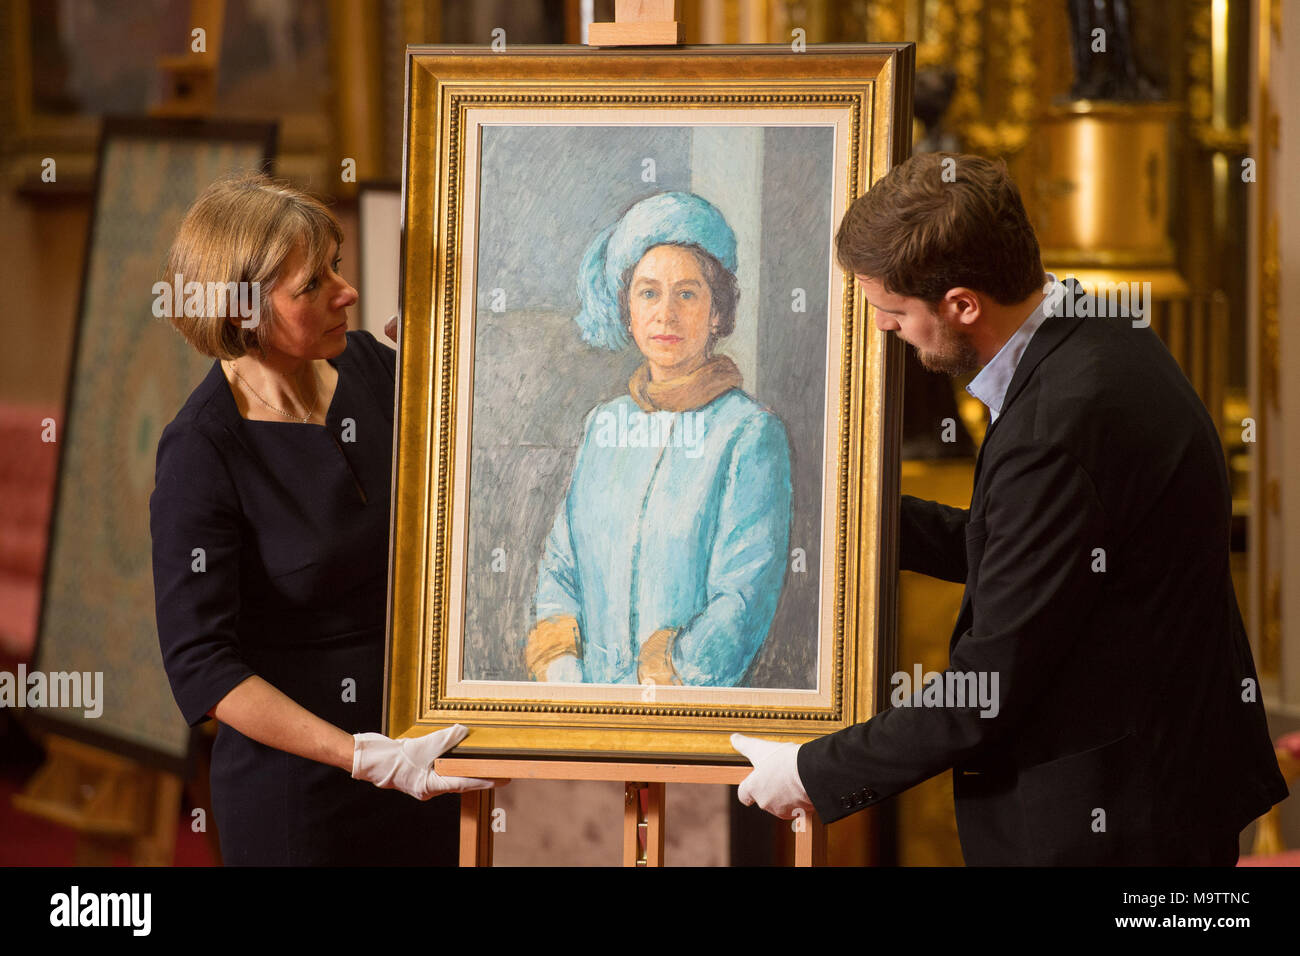 Royal Collection staff adjust (front row, left to right) an oil sketch 'HM the Queen, 1972-73' by Michael Noakes during the press preview of the Prince and Patron exhibition at Buckingham Palace, London, which will mark the 70th birthday of the Prince of Wales this year. Stock Photo